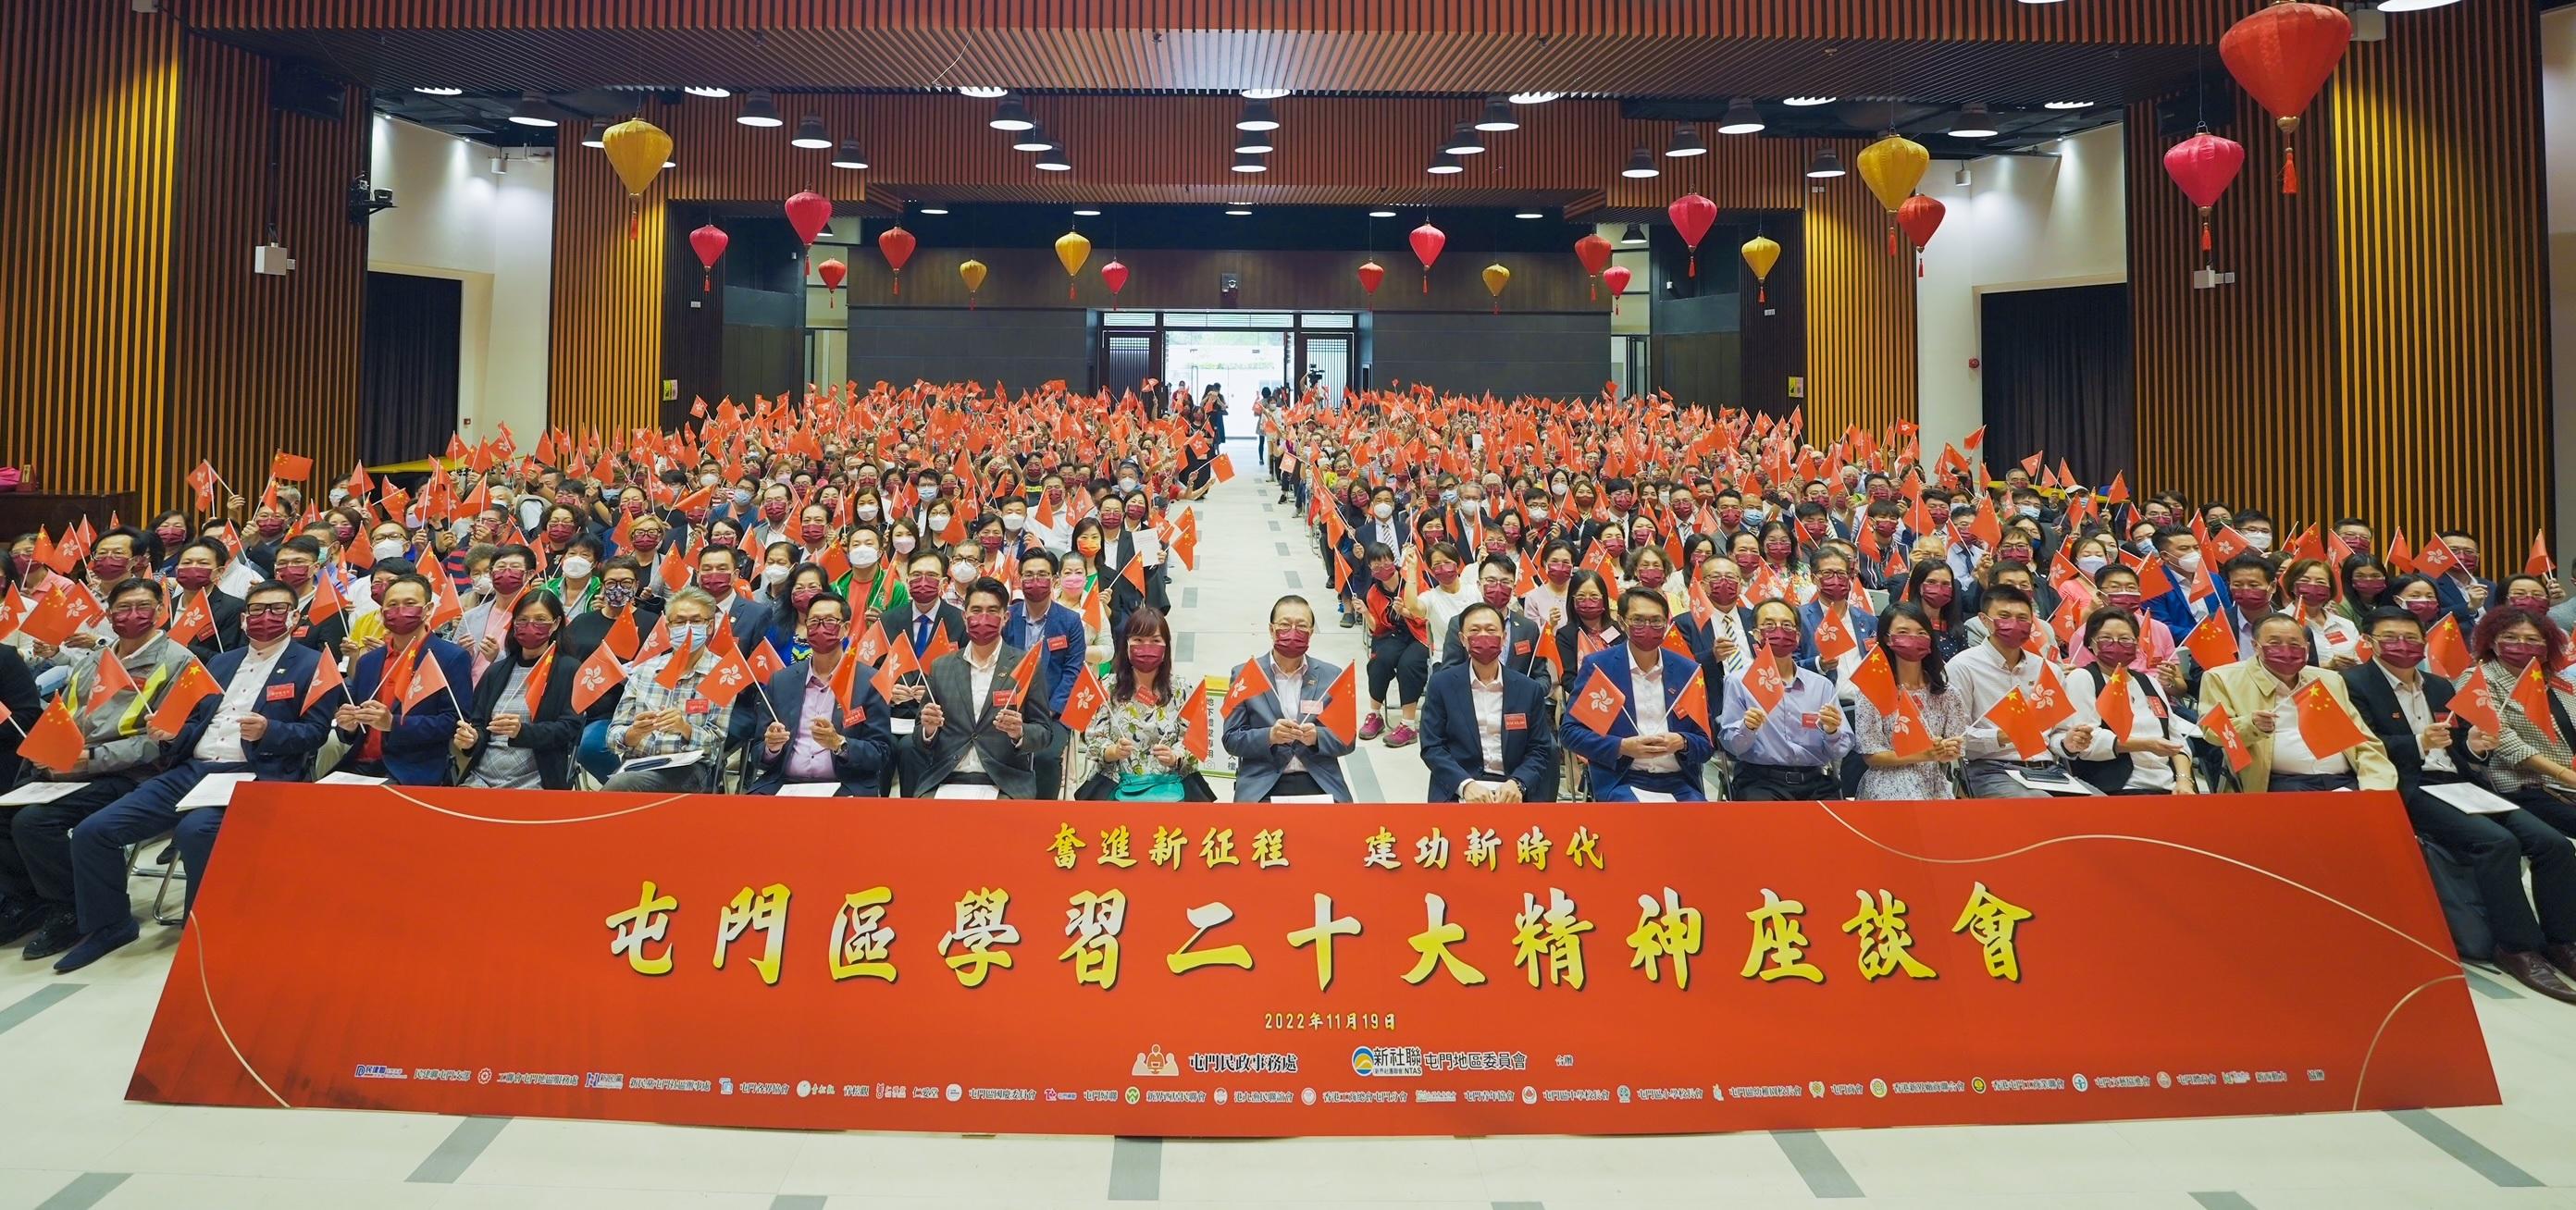 The Tuen Mun District Office, together with the New Territories Association of Societies Tuen Mun District Committee, held a session on "Spirit of the 20th National Congress of the CPC" at the hall of Ching Chung Taoist Association Building on November 19. Photo shows the guests and participants at the session.